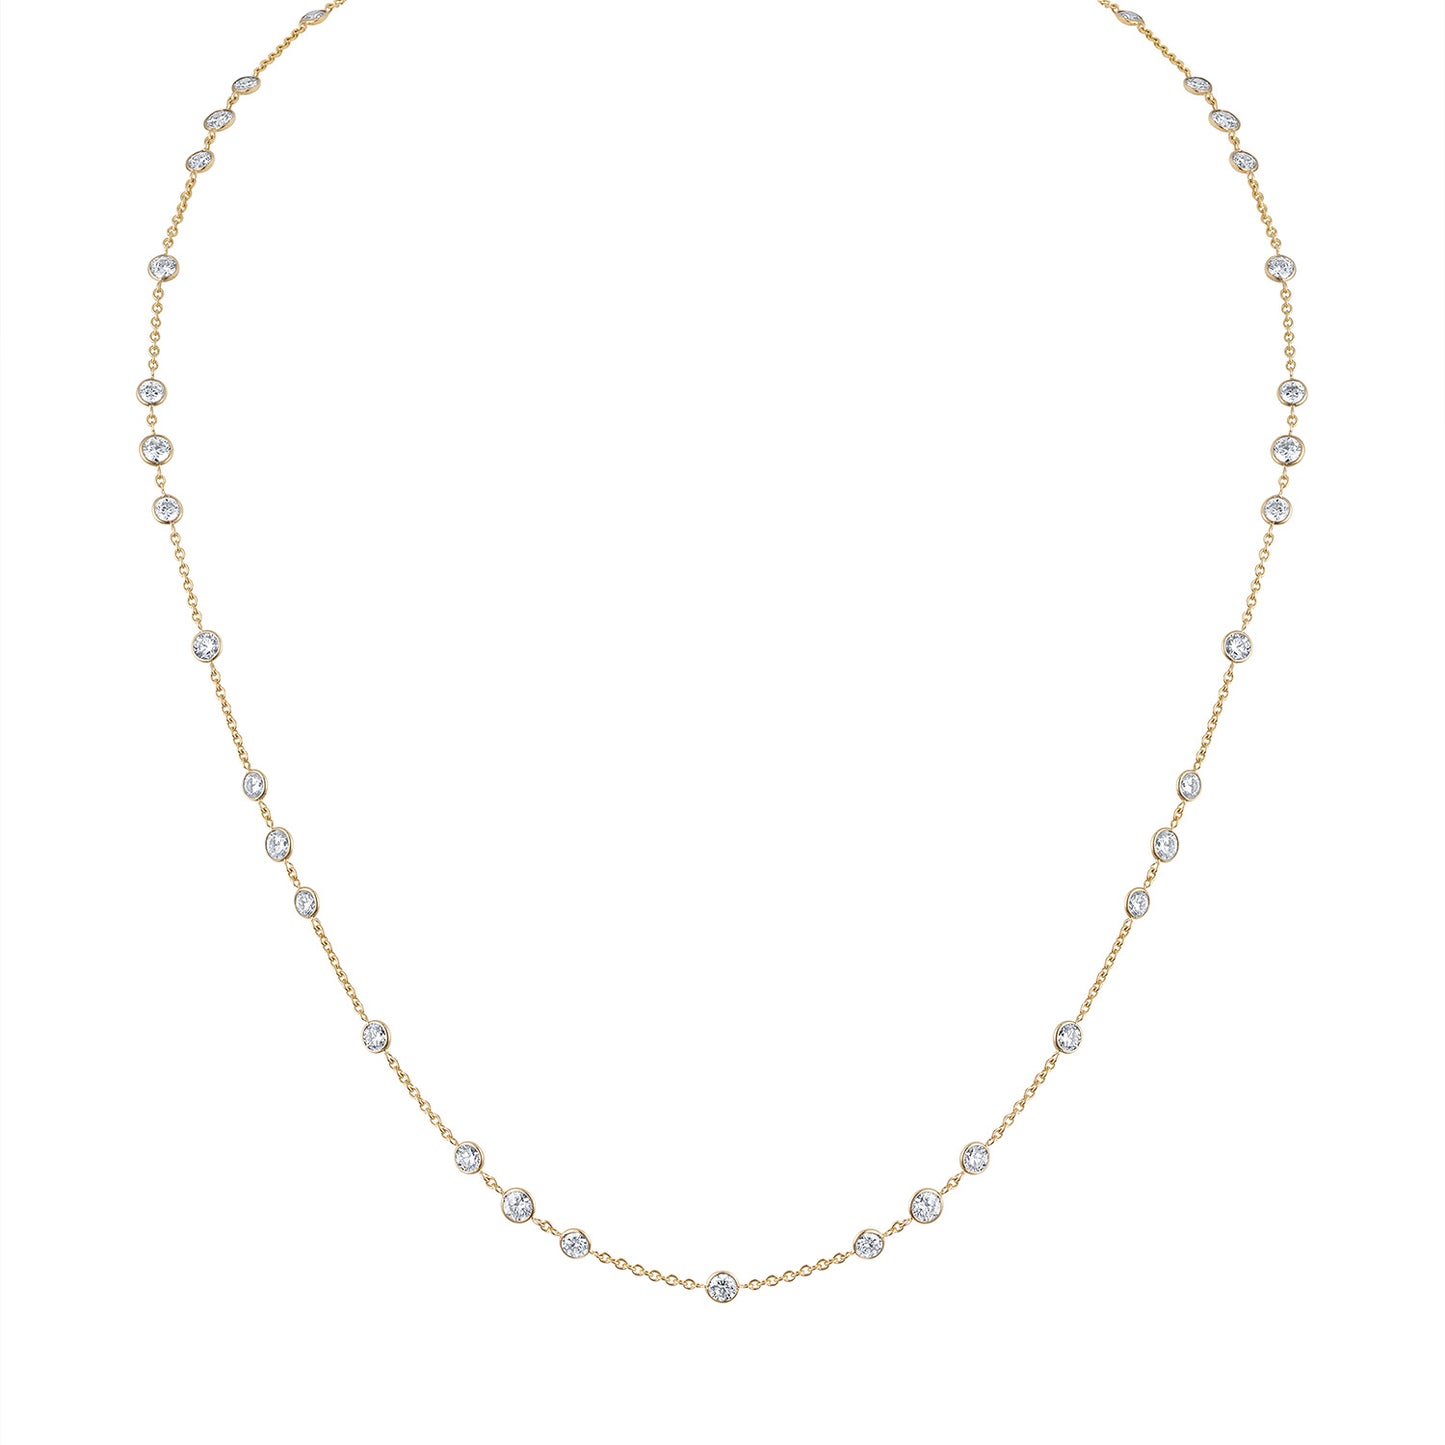 Gorgeous Diamonds by the Yard necklace featuring over five carats of top quality diamonds set in handmade gold. Classic design with fresh diamond spacing for day to night wear.